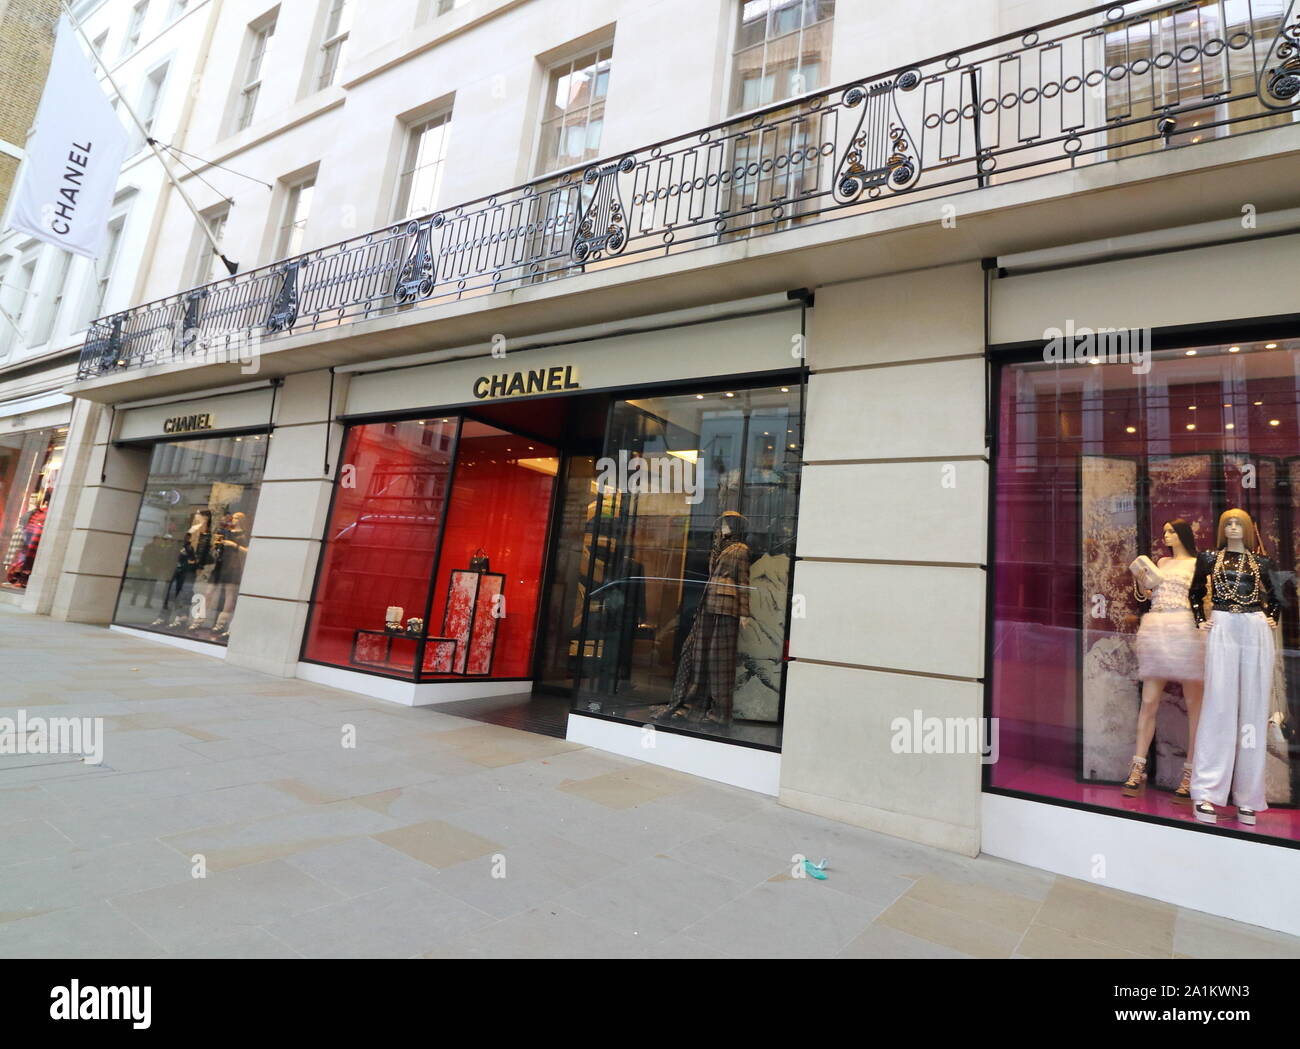 April 2019. London. A View Of The Chanel Store On Bond Street In